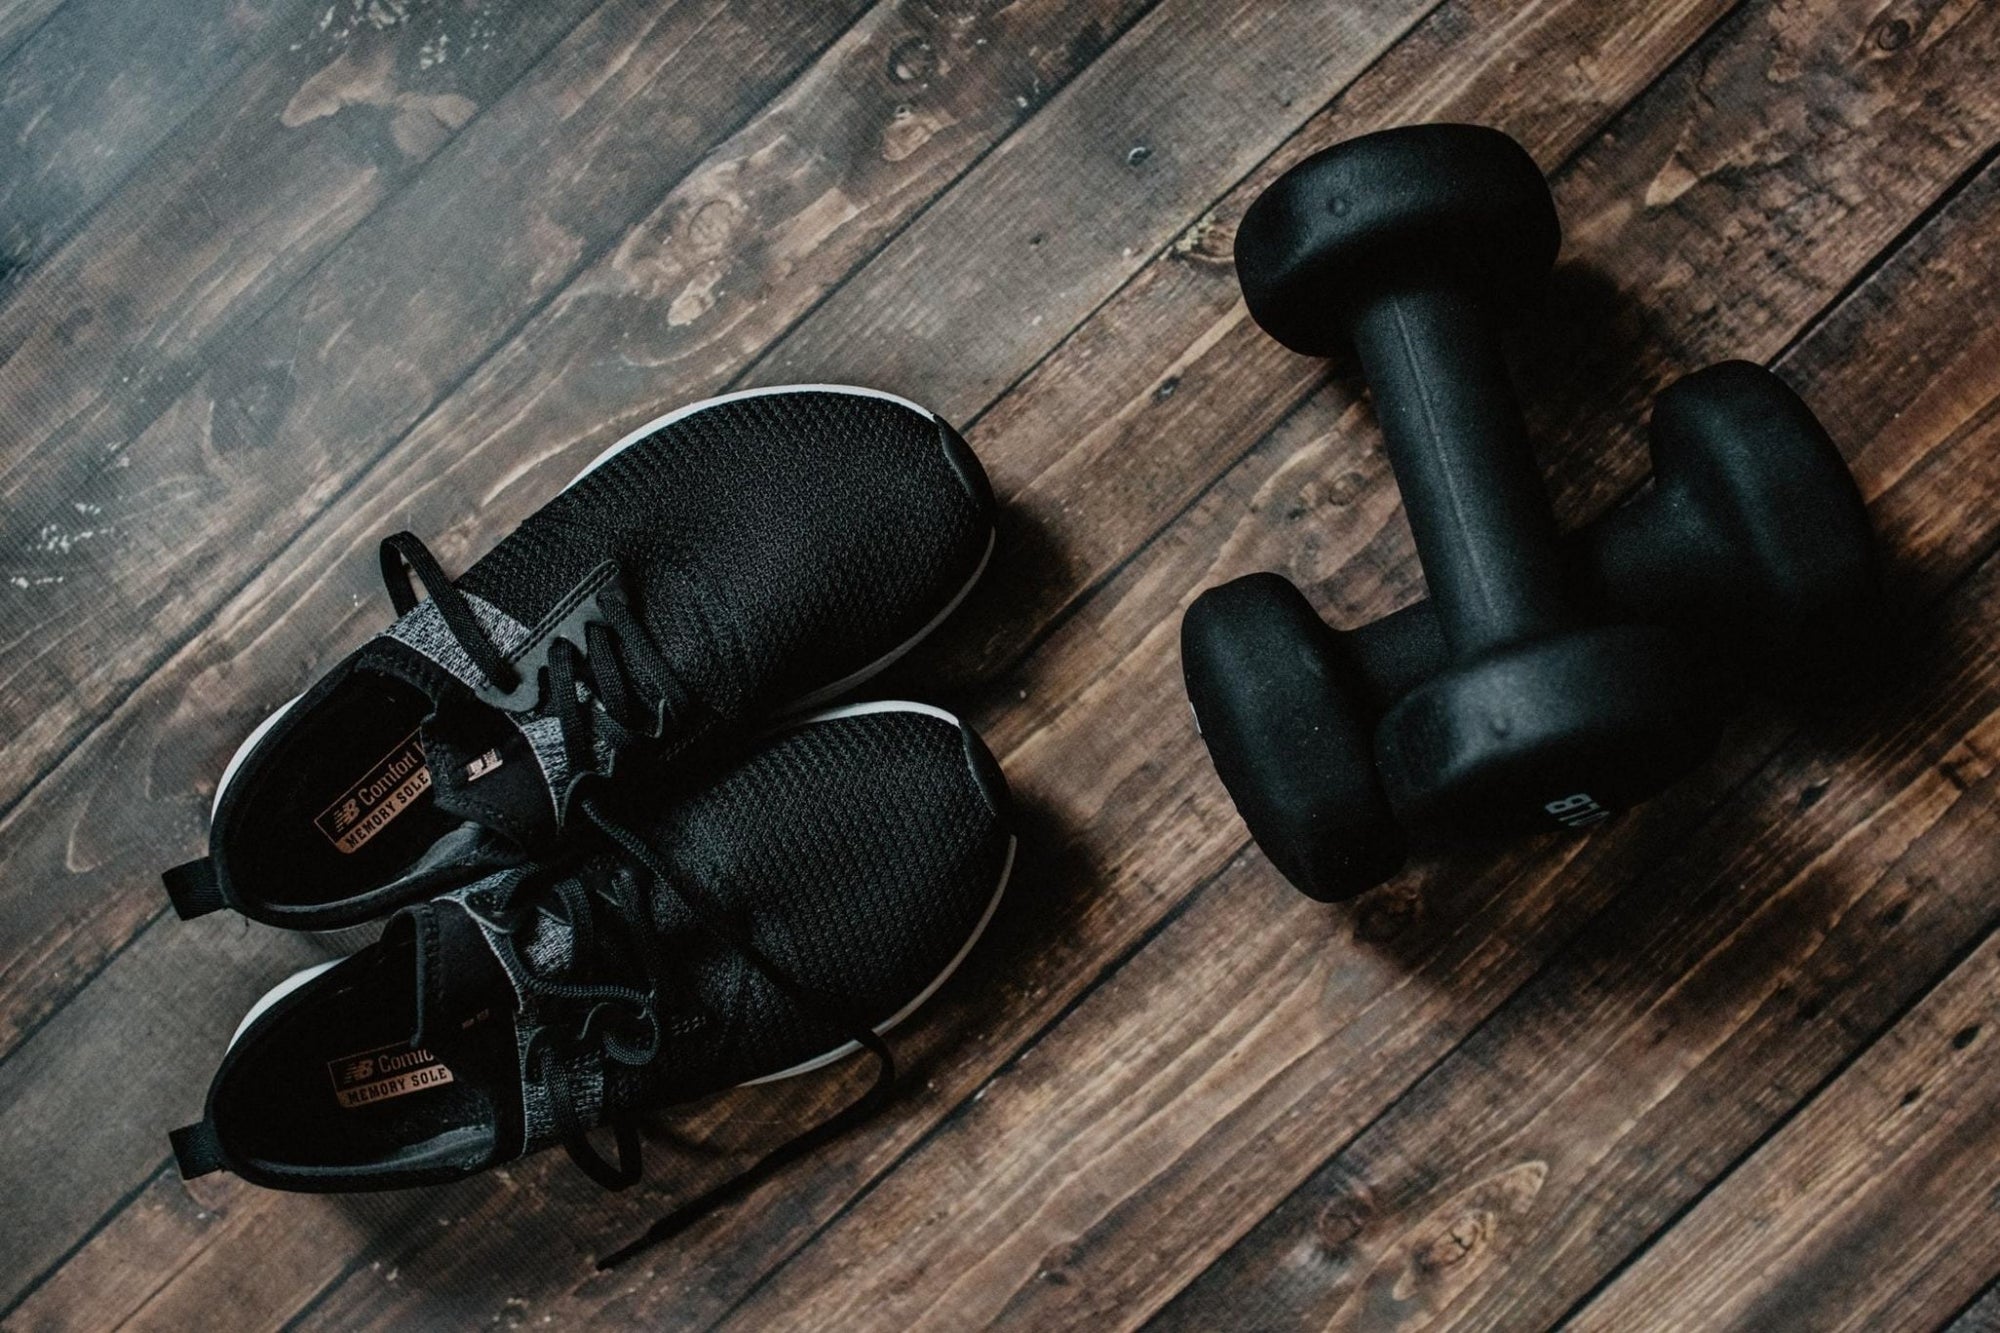 The Right Home Fitness Program Can Meet Your Exercise Goals - Utah Home Fitness